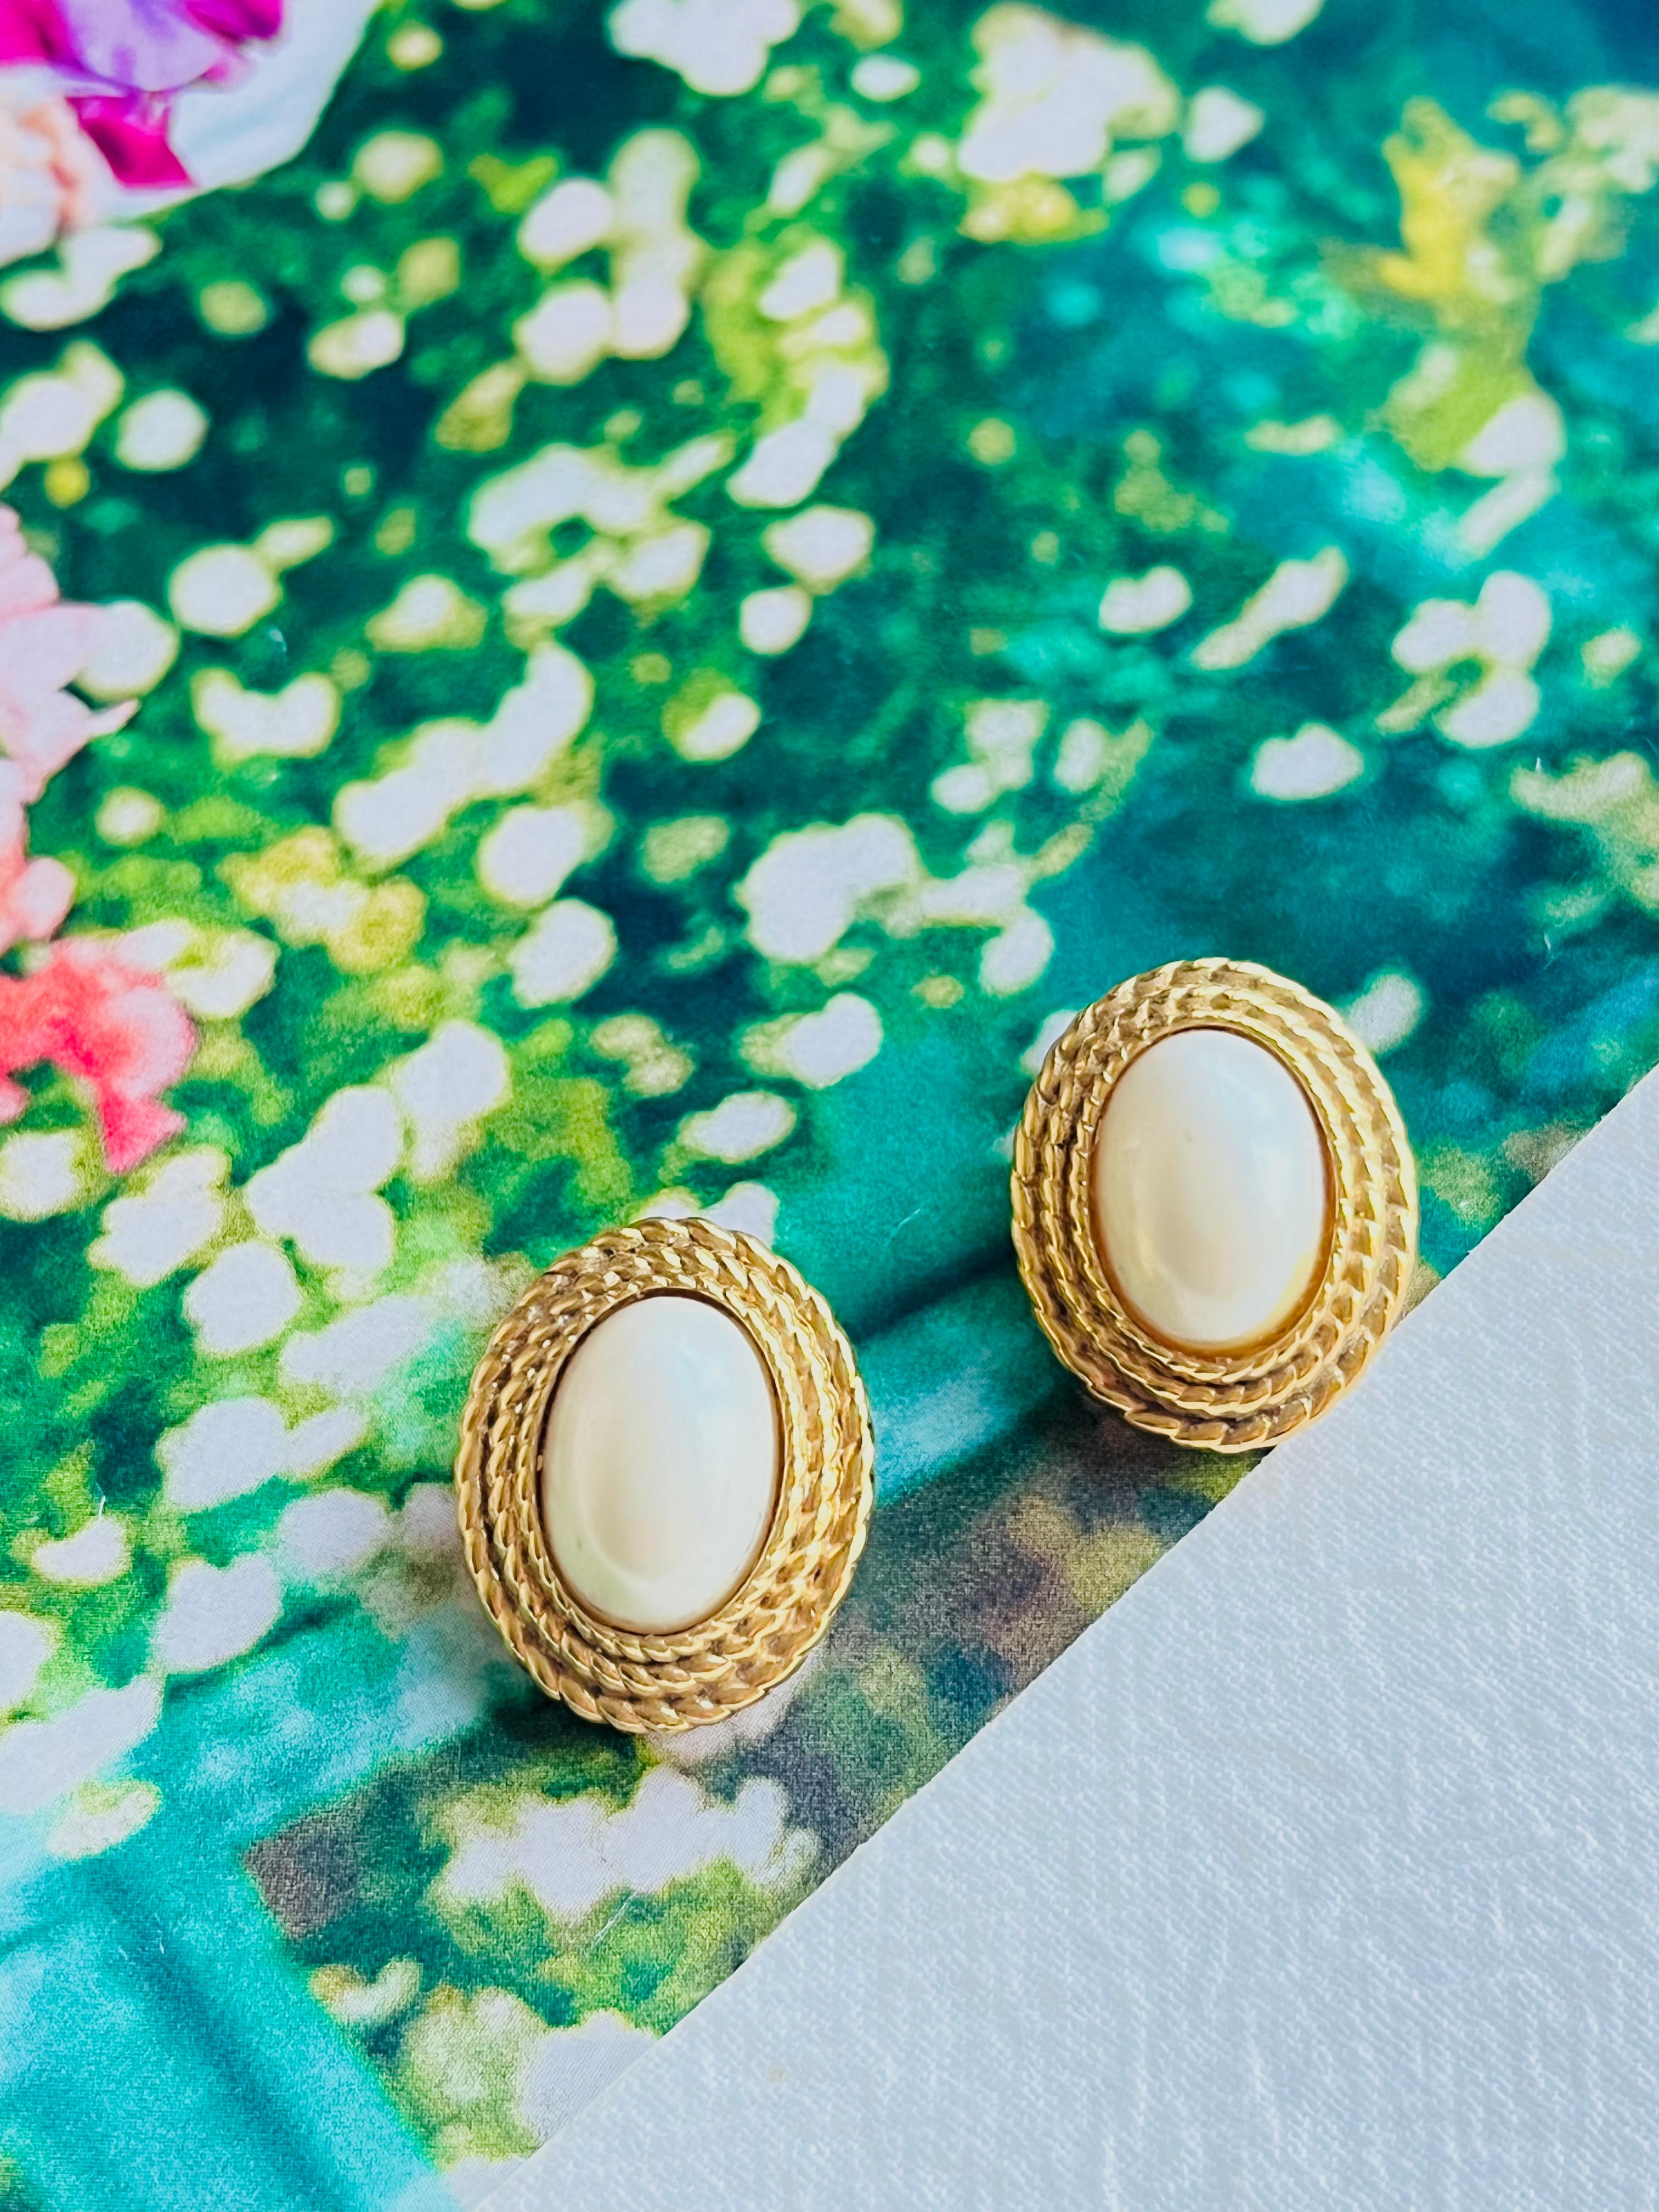 Christian Dior Vintage 1980s White Oval Pearl Triple Layer Swirl Braid Earrings In Excellent Condition For Sale In Wokingham, England